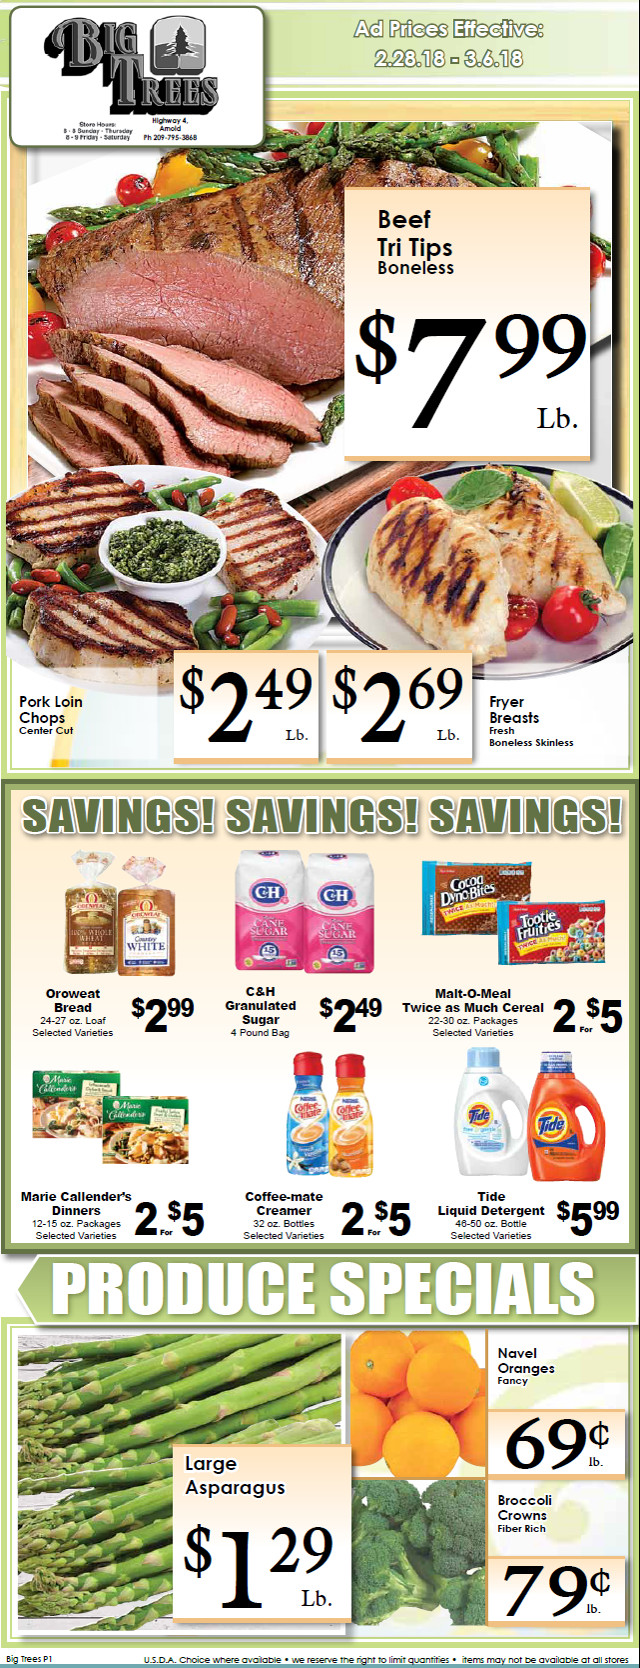 Big Trees Market Weekly Ad & Specials Through March 6th